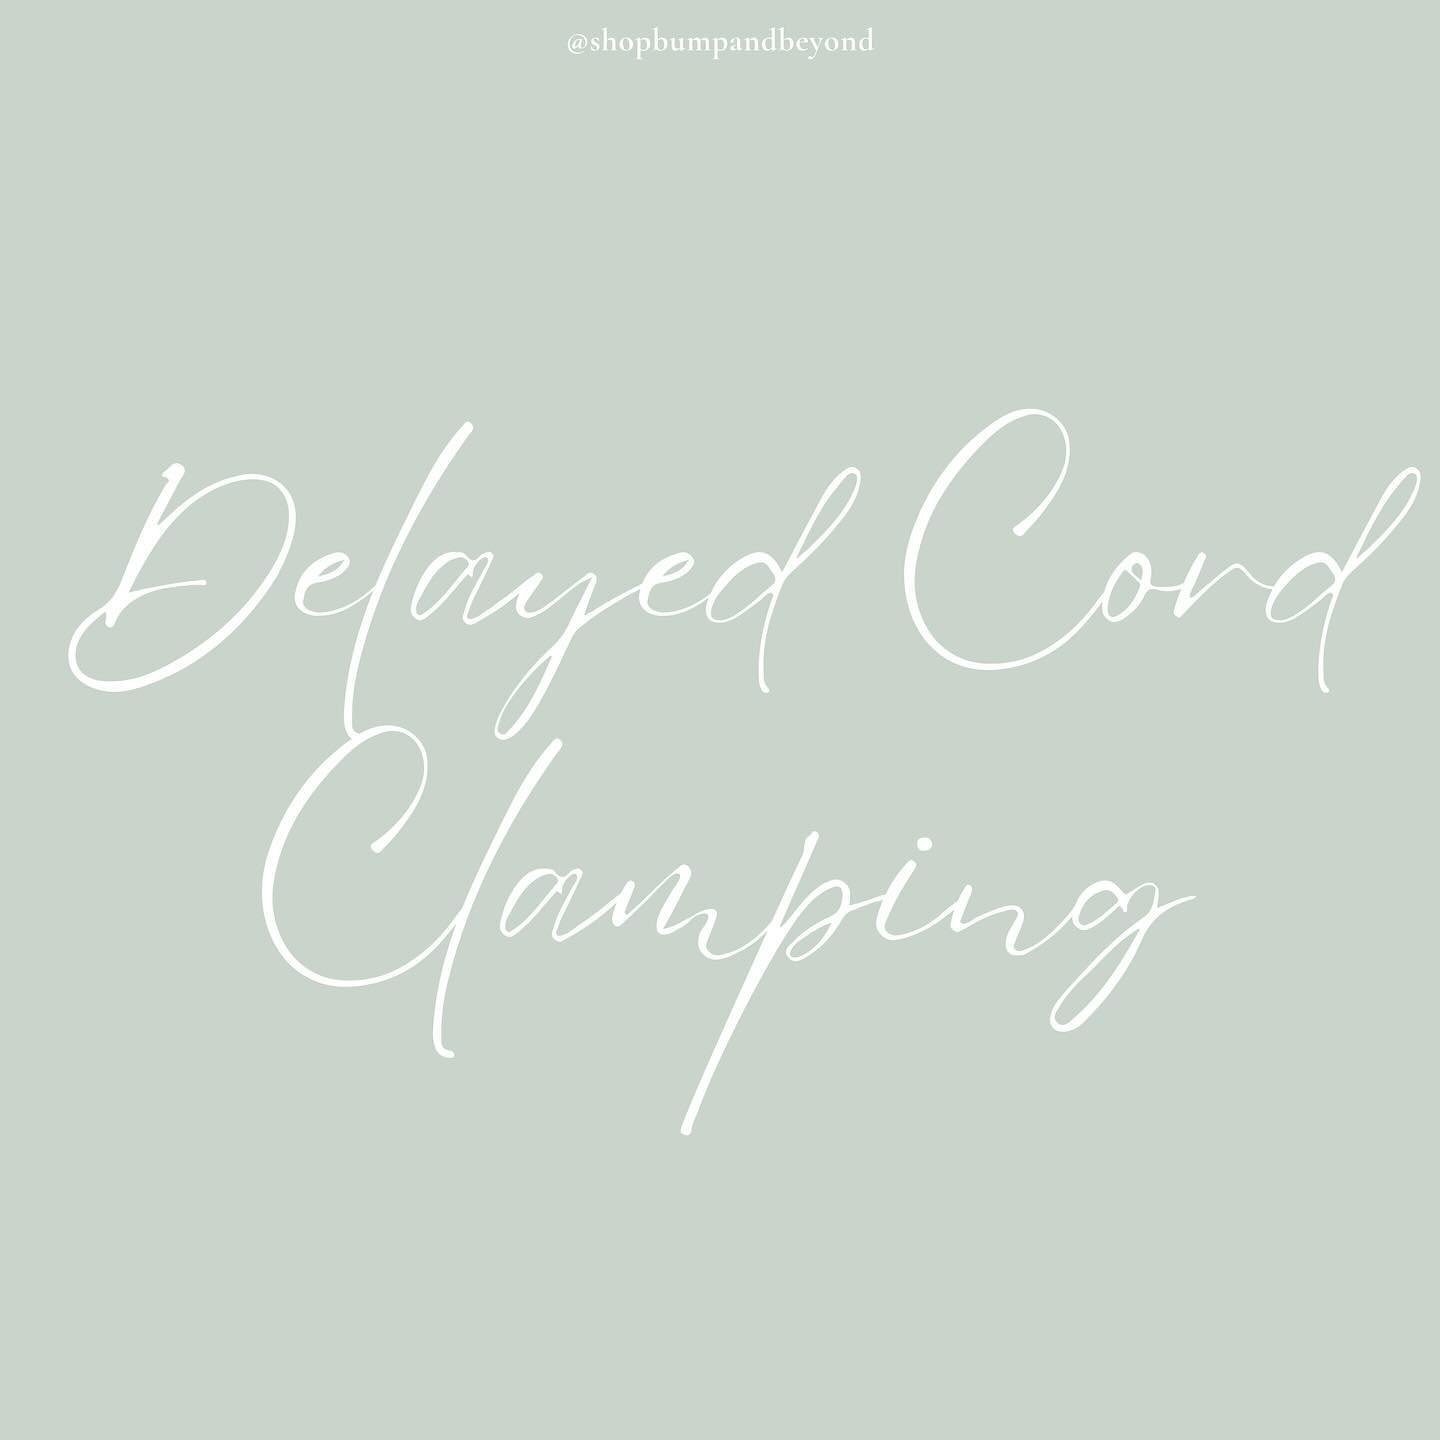 Let&rsquo;s talk delayed cord clamping! Have you/would you do delayed cord clamping?